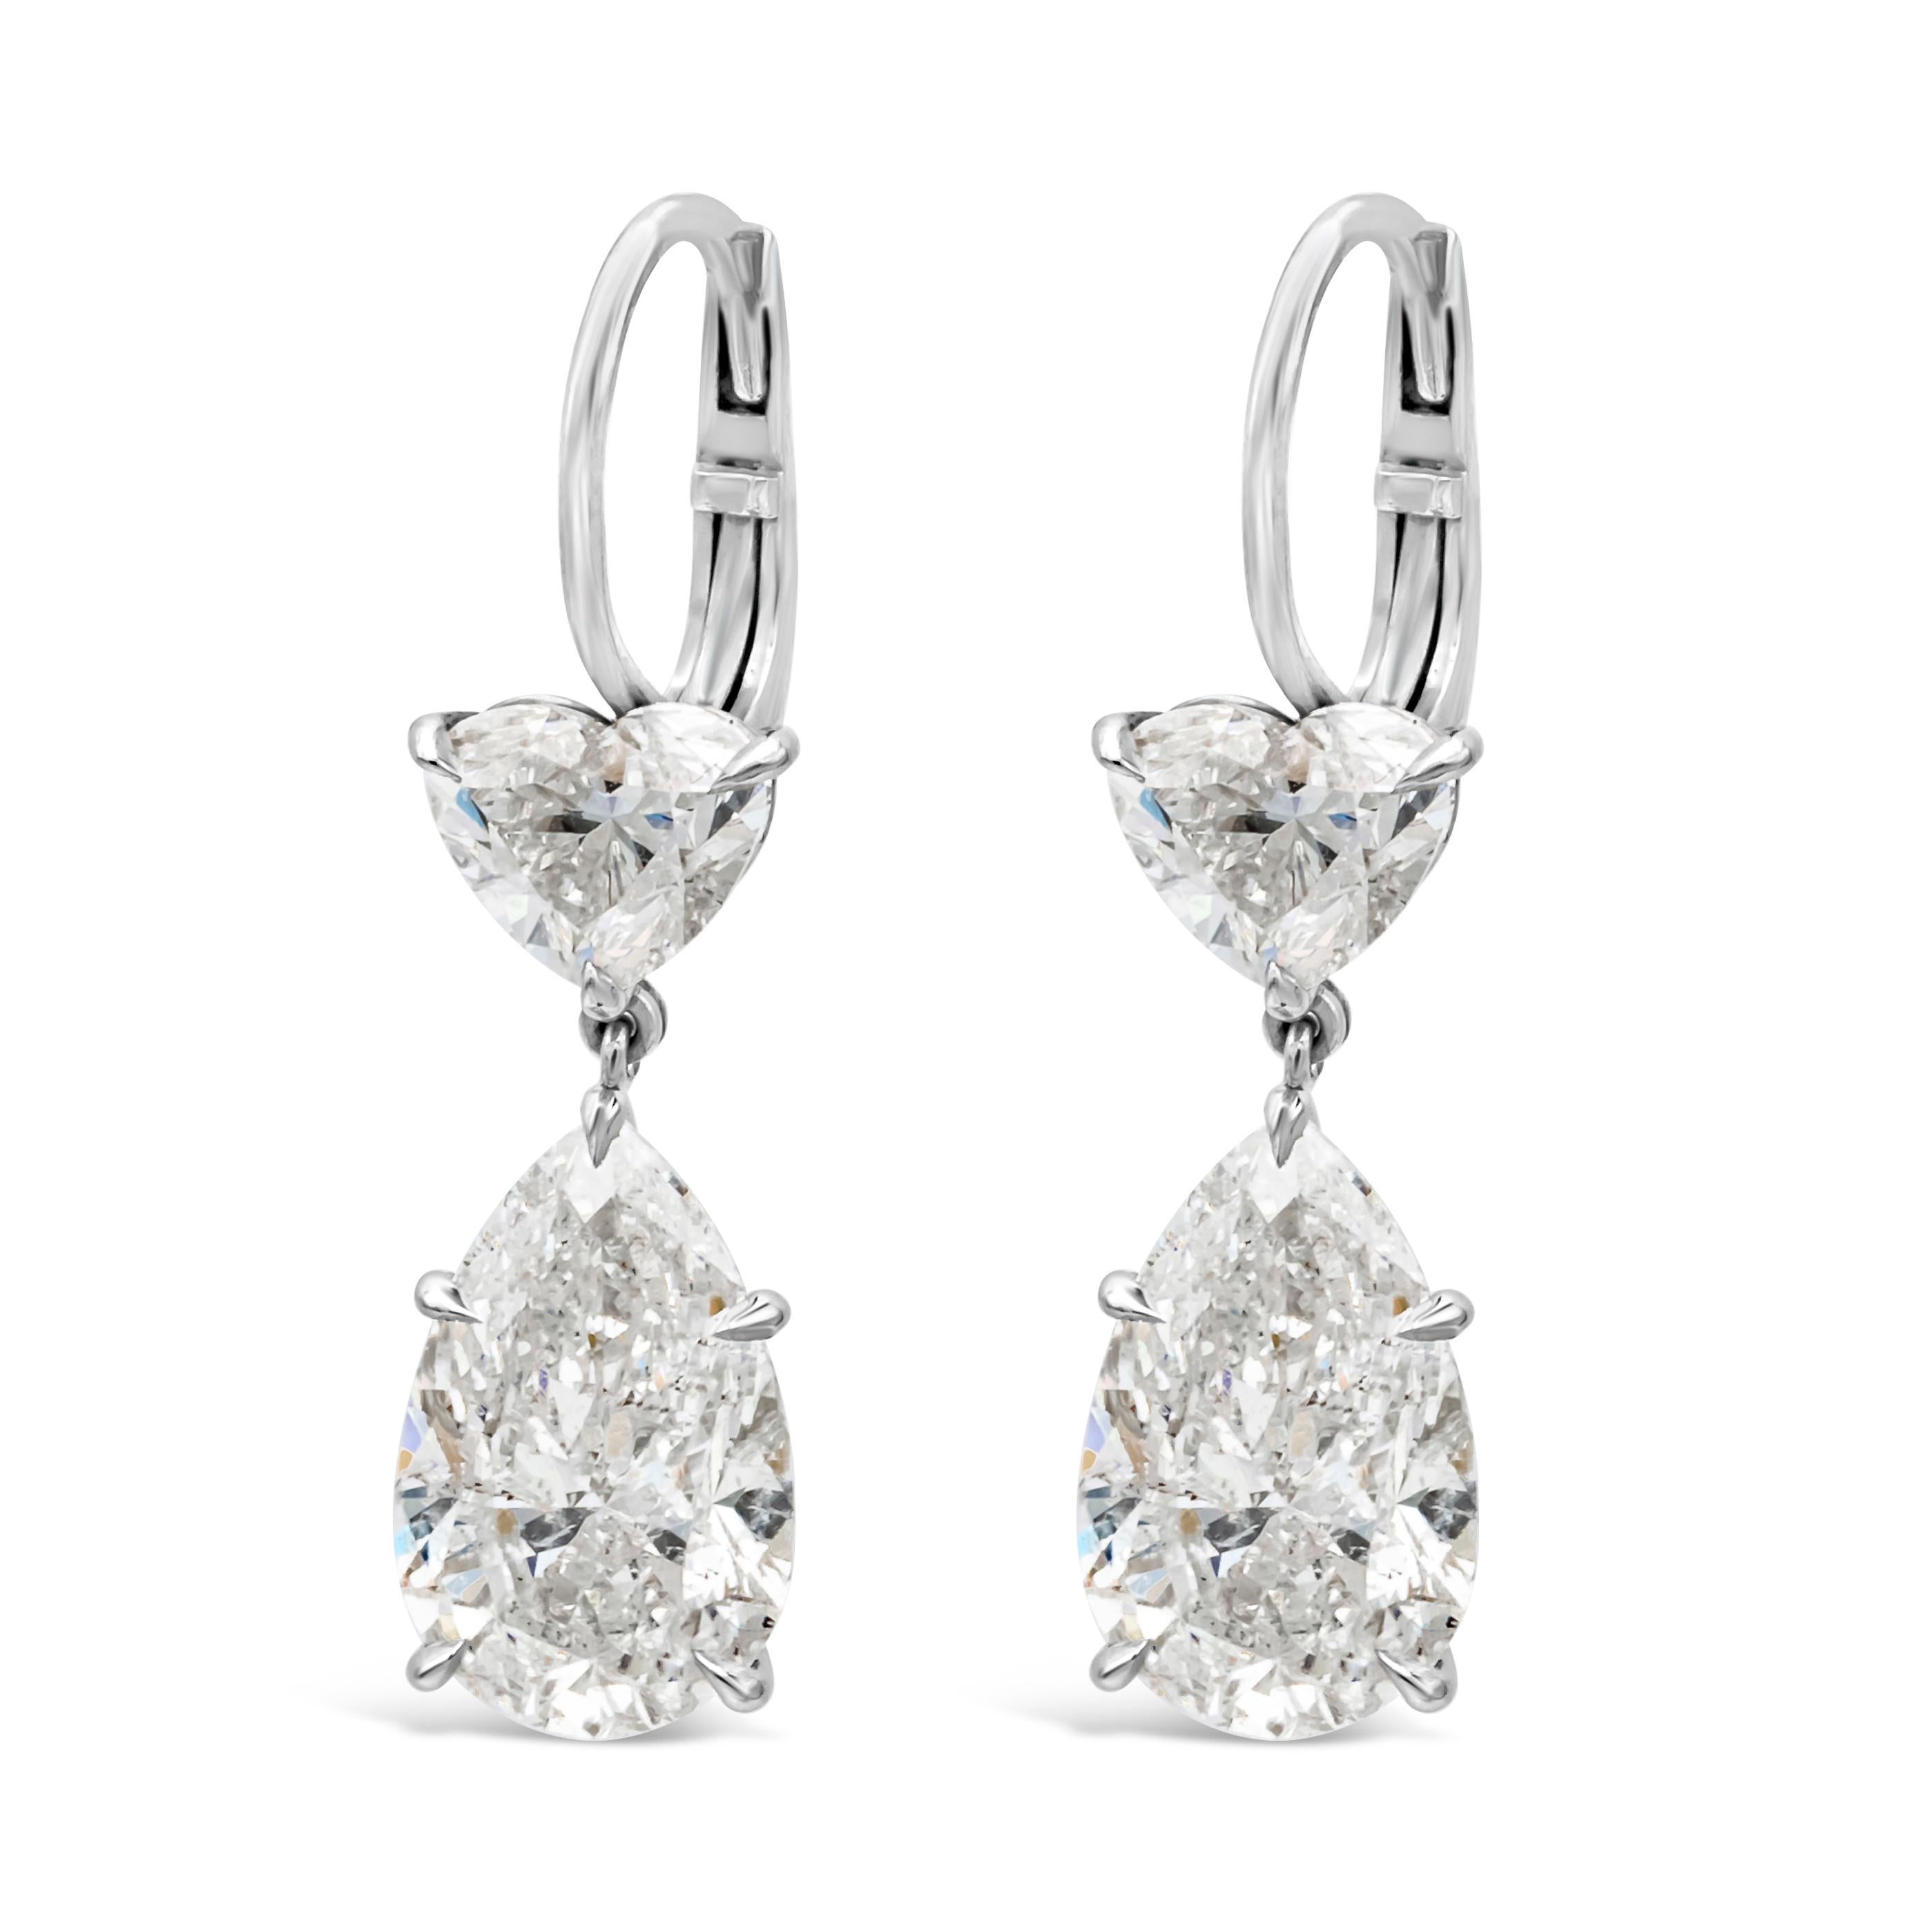 A classy and well crafted pair of high end dangle earrings featuring GIA certified pear shape and brilliant heart shape diamonds elegantly suspended to each other. Pear shape diamonds weigh 6.07 carats total, F-G color and I2 in clarity. Heart Shape